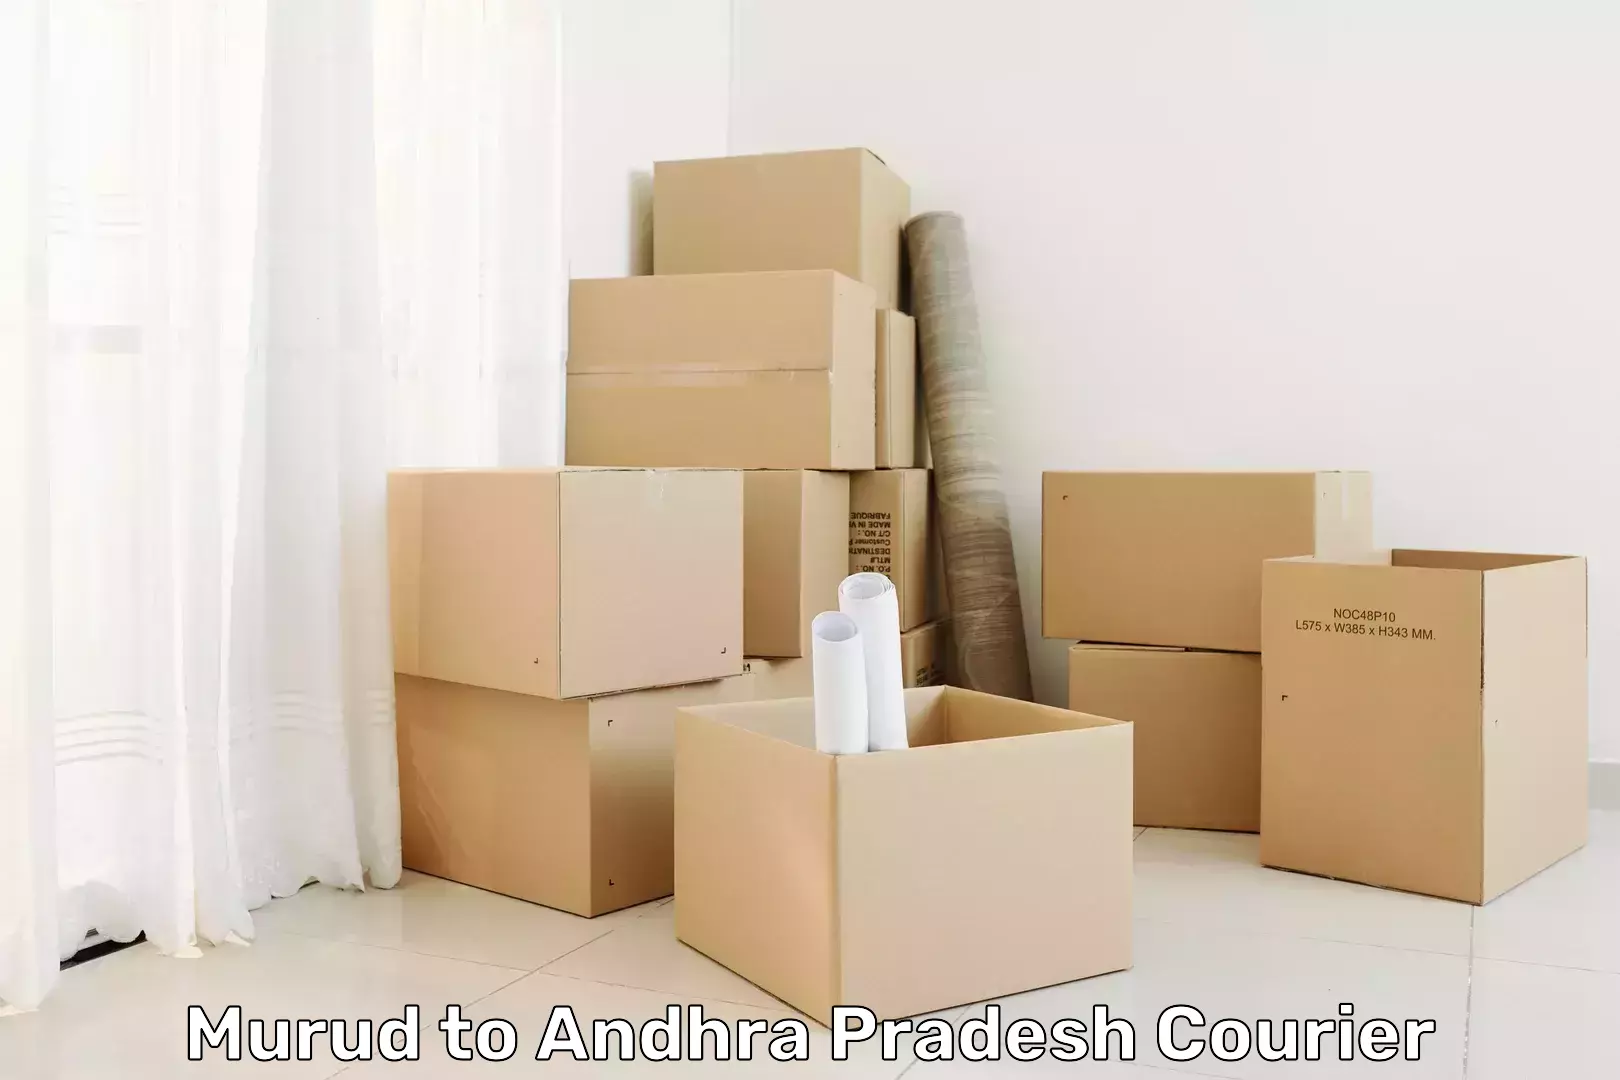 Easy access courier services Murud to Visakhapatnam Port